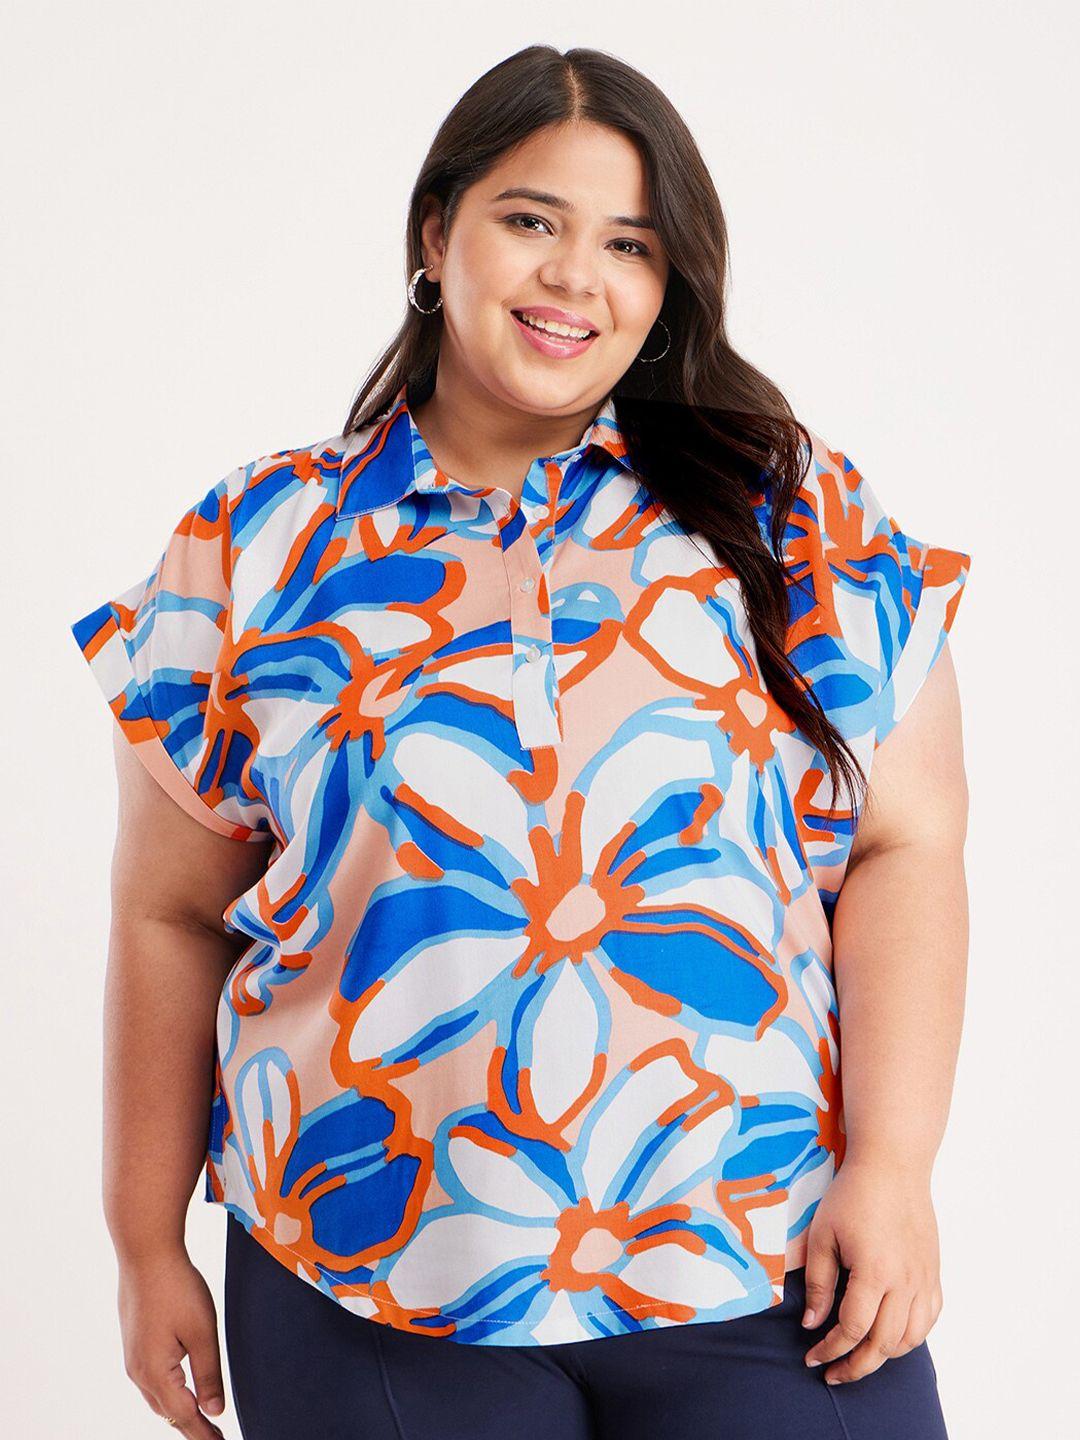 fablestreet x floral printed shirt style top